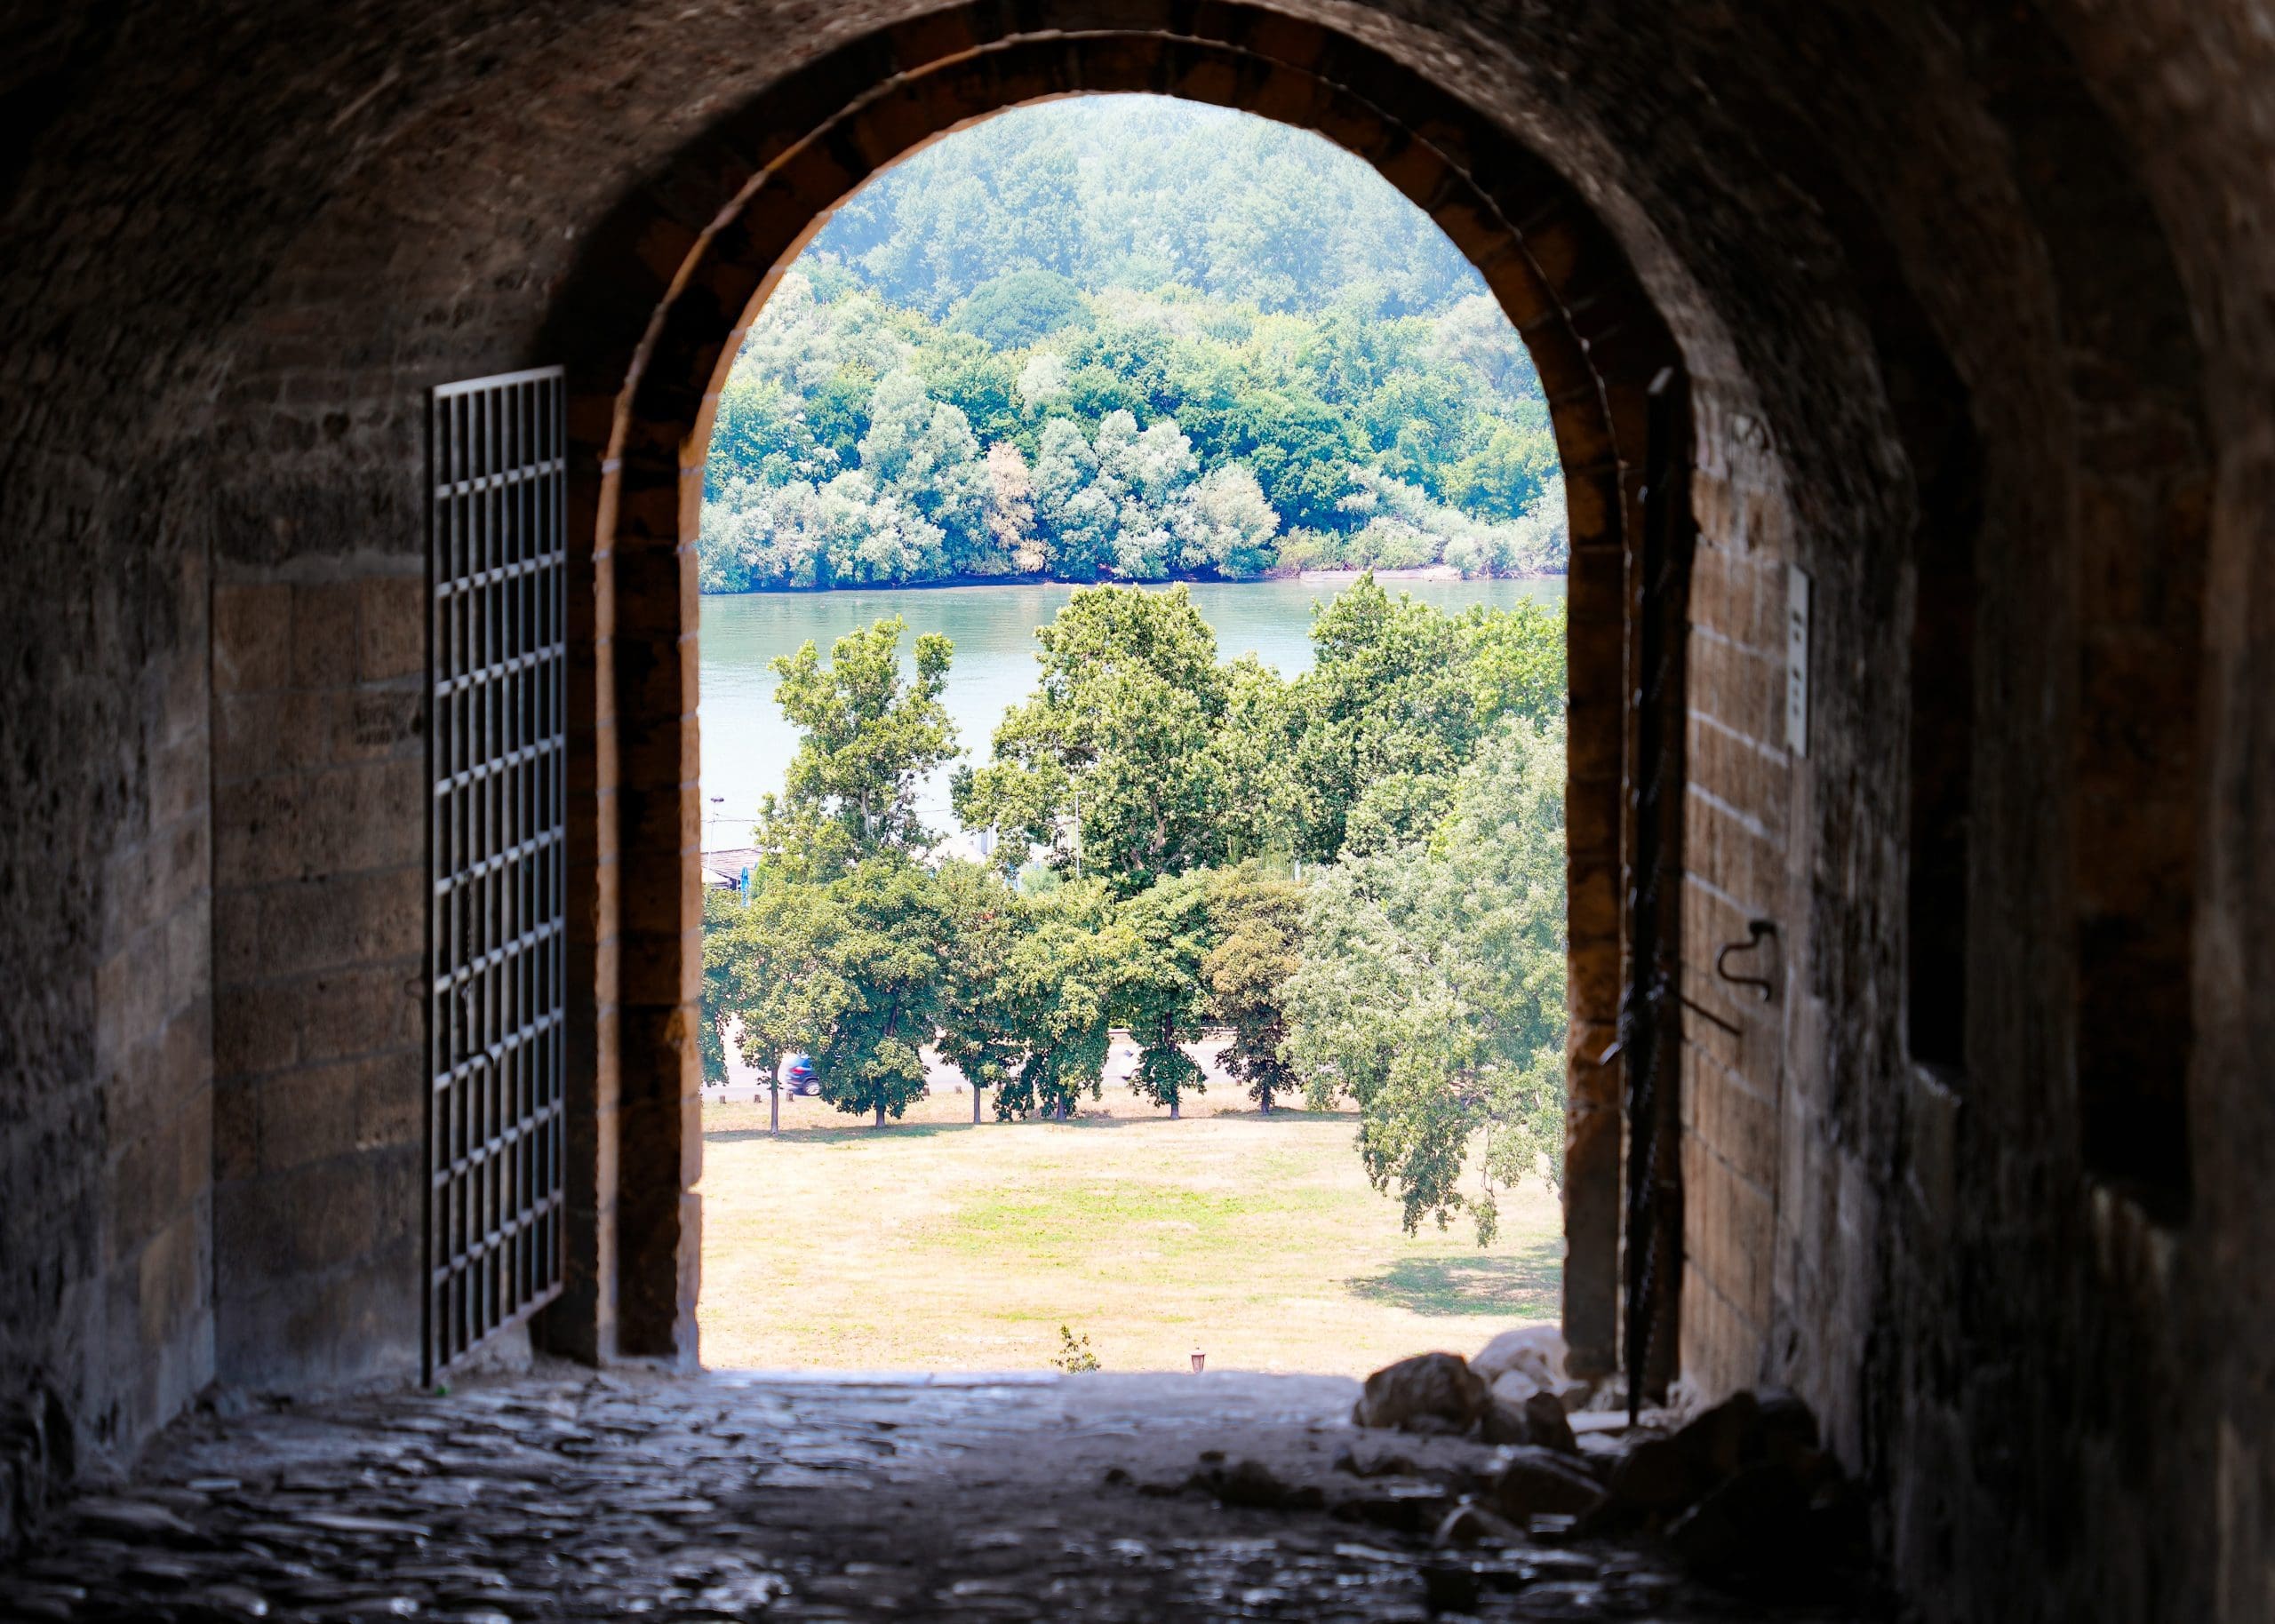 Door of fortress looking out over river